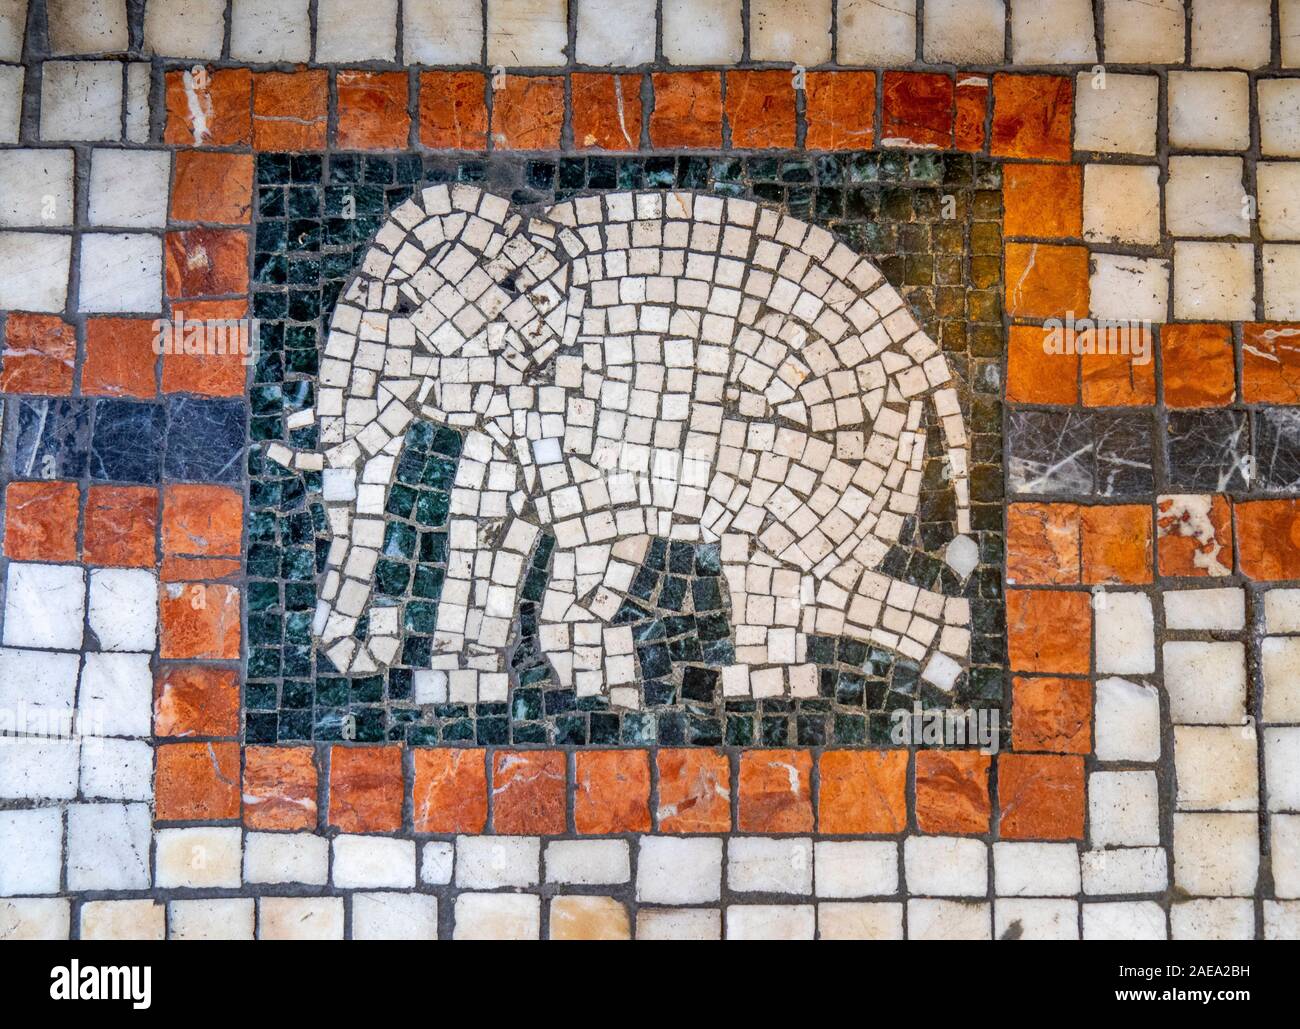 Elephant in mosaic tiles on the floor outside Adria Palace New Town Prague Czech Republic. Stock Photo